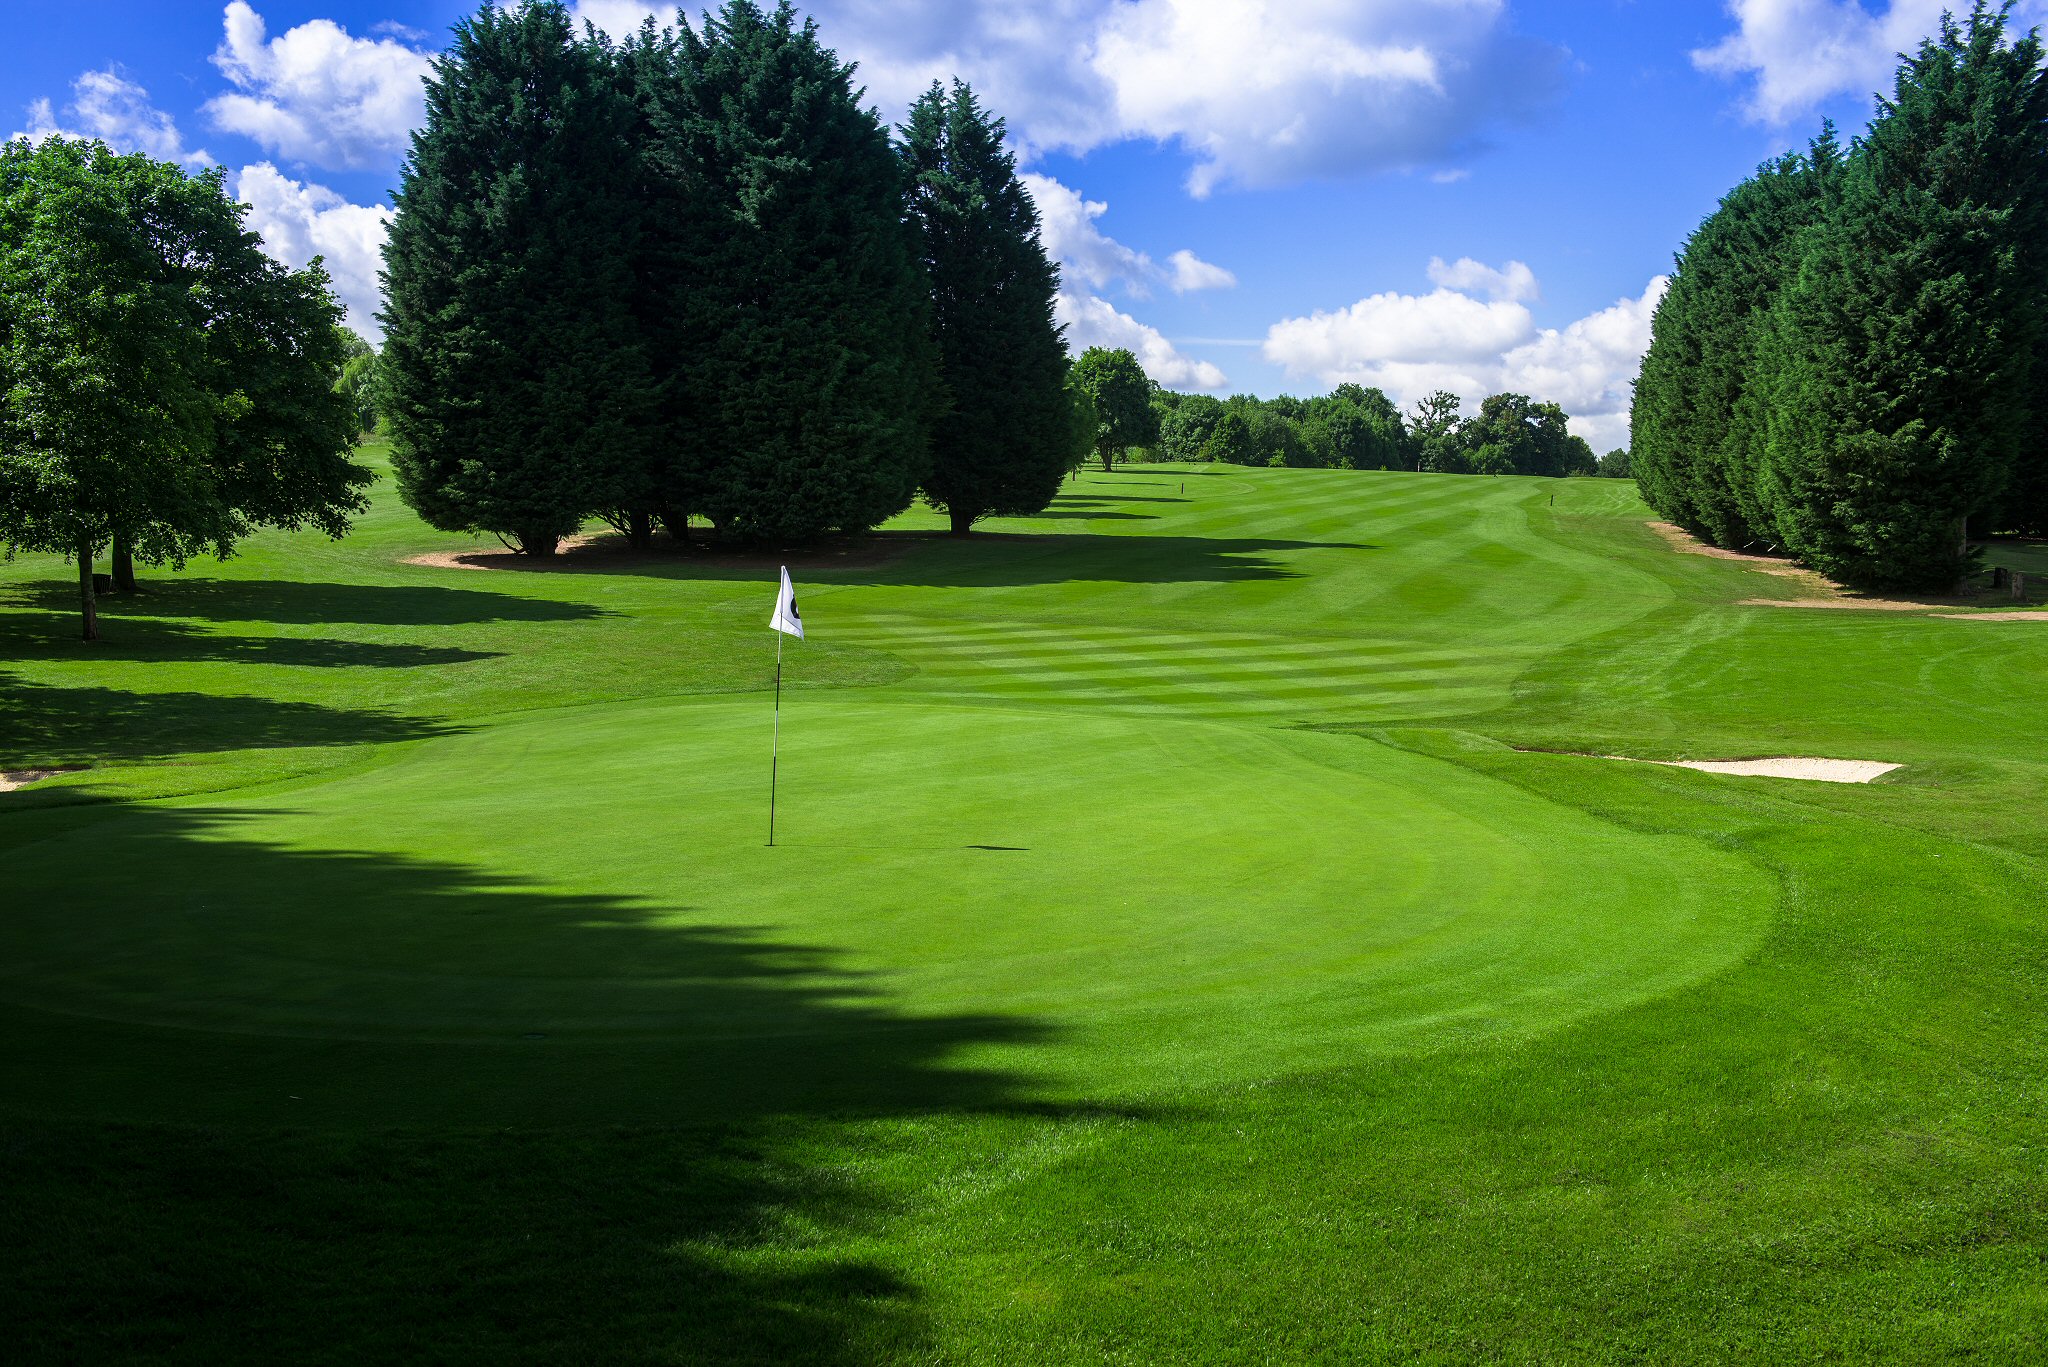 Tewkesbury Park: a Cotswold golfing haven offering something for all